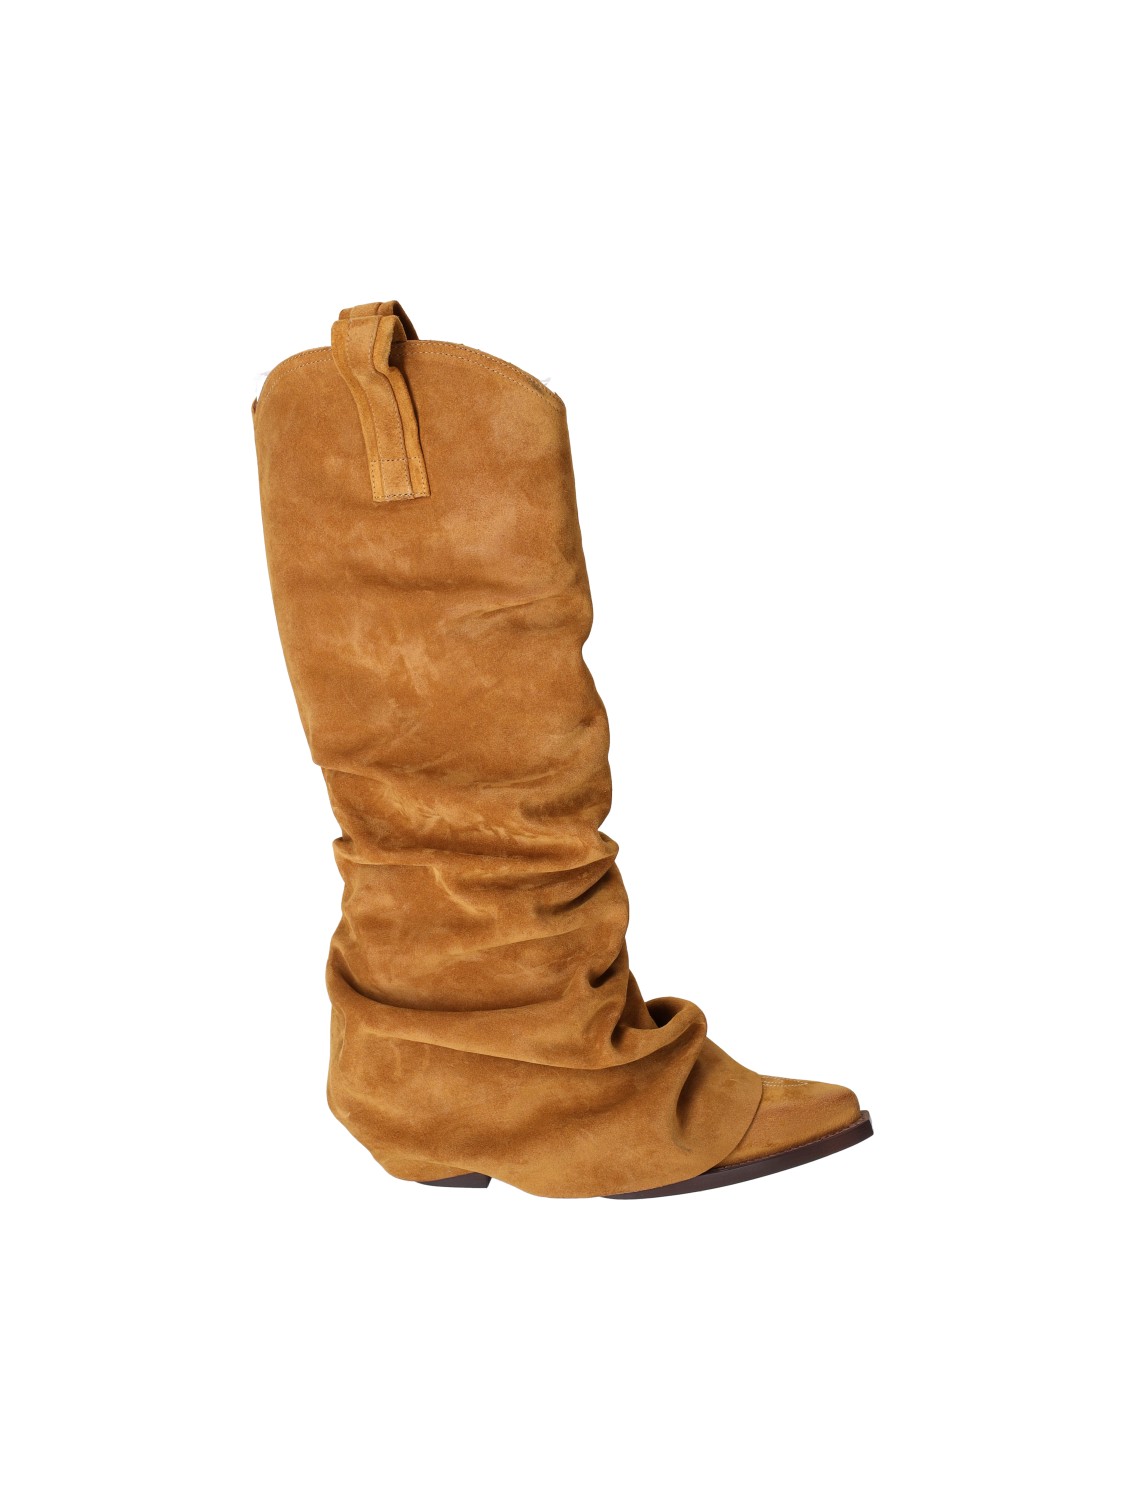 Cowboy boots in suede boot top design 